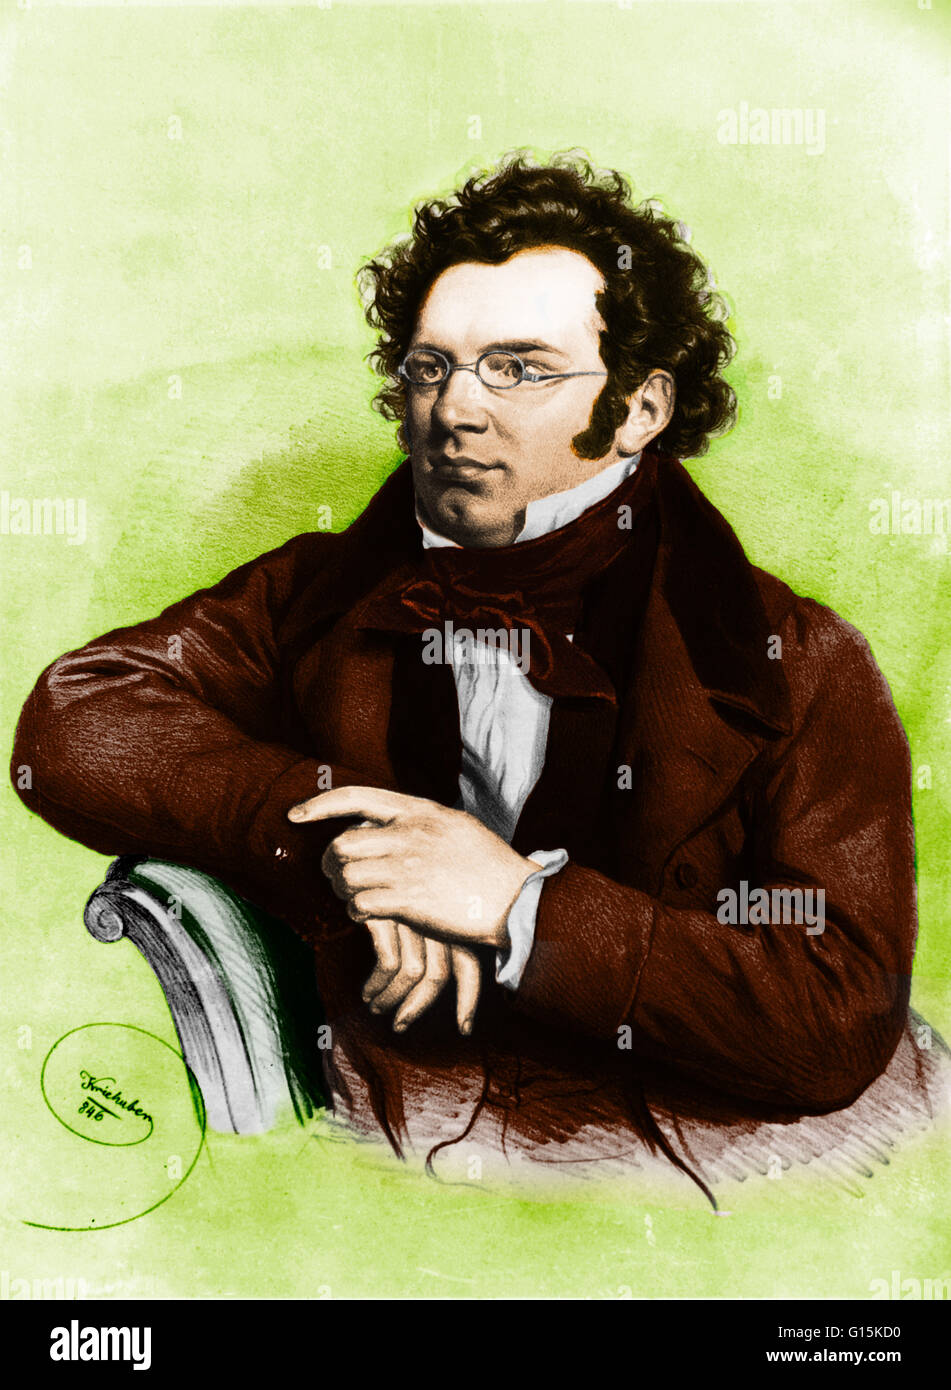 Franz Peter Schubert ( January 31, 1797 - November 19, 1828) was an Austrian composer. He was a prolific composer, having written some 600 Lieder (19th-century German art song characterized by the setting of a poetic text in either strophic or through-com Stock Photo